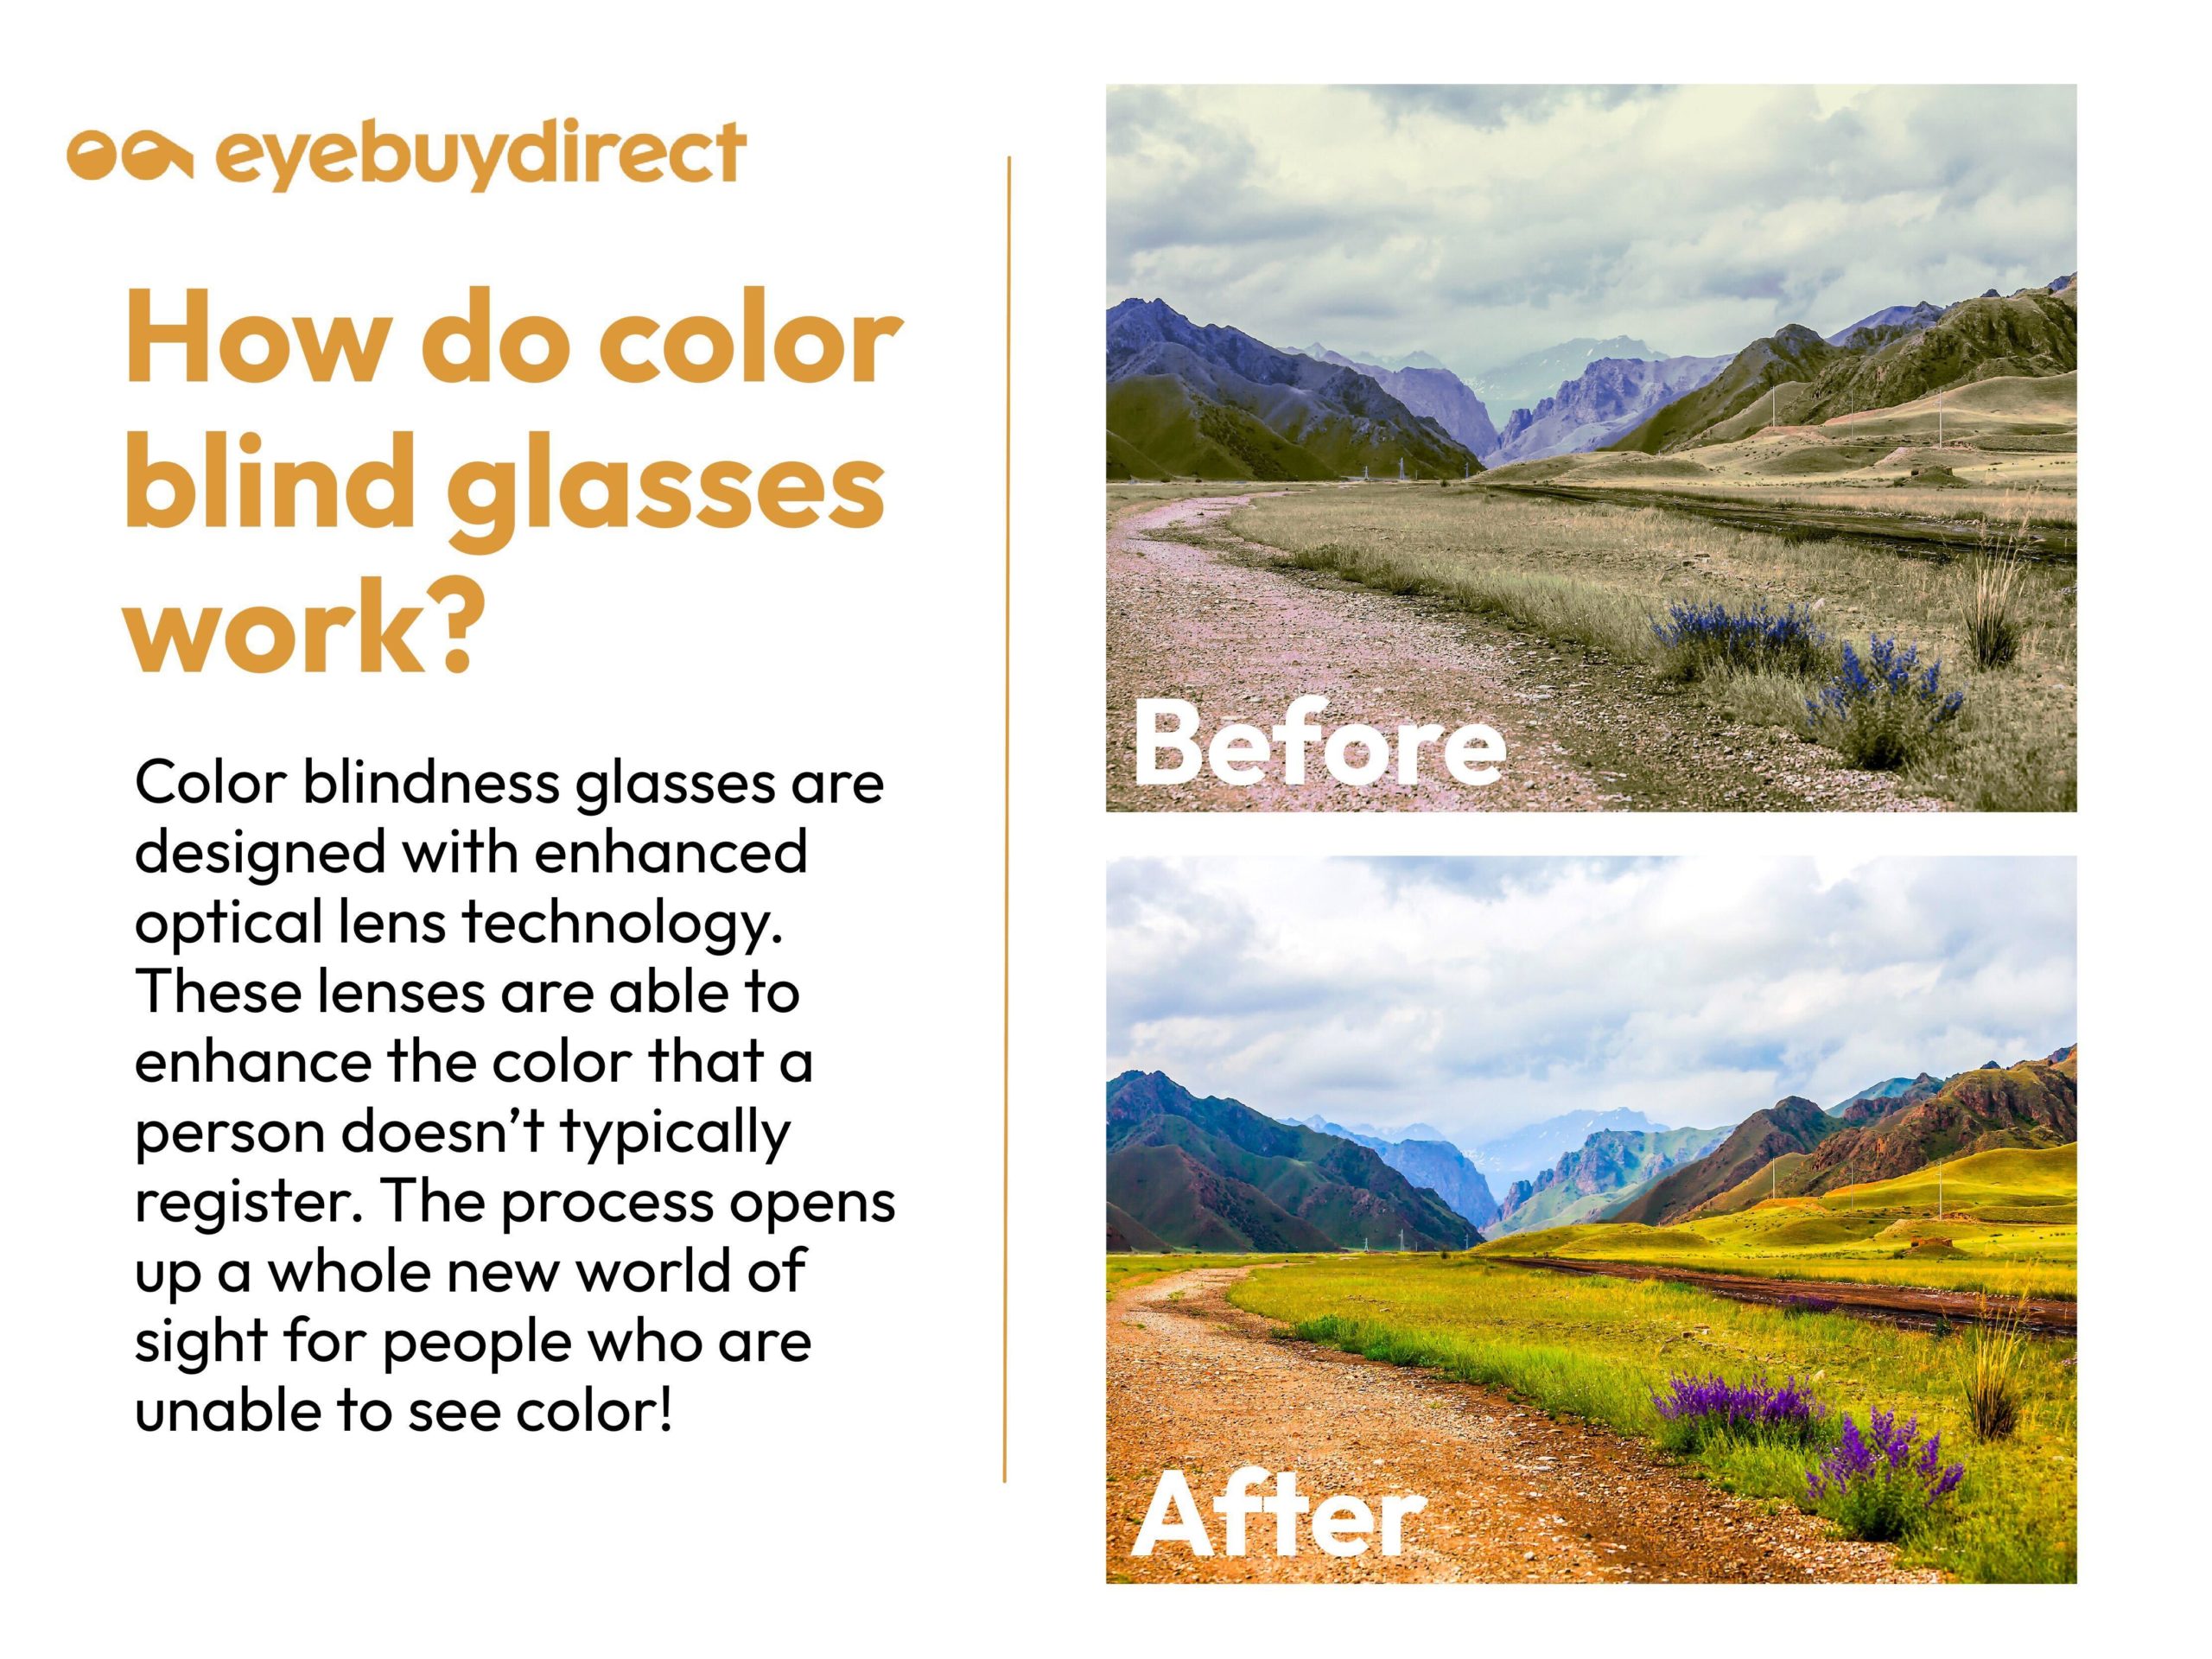 An image showing how a mountain landscape looks before and after wearing colorblindness glasses